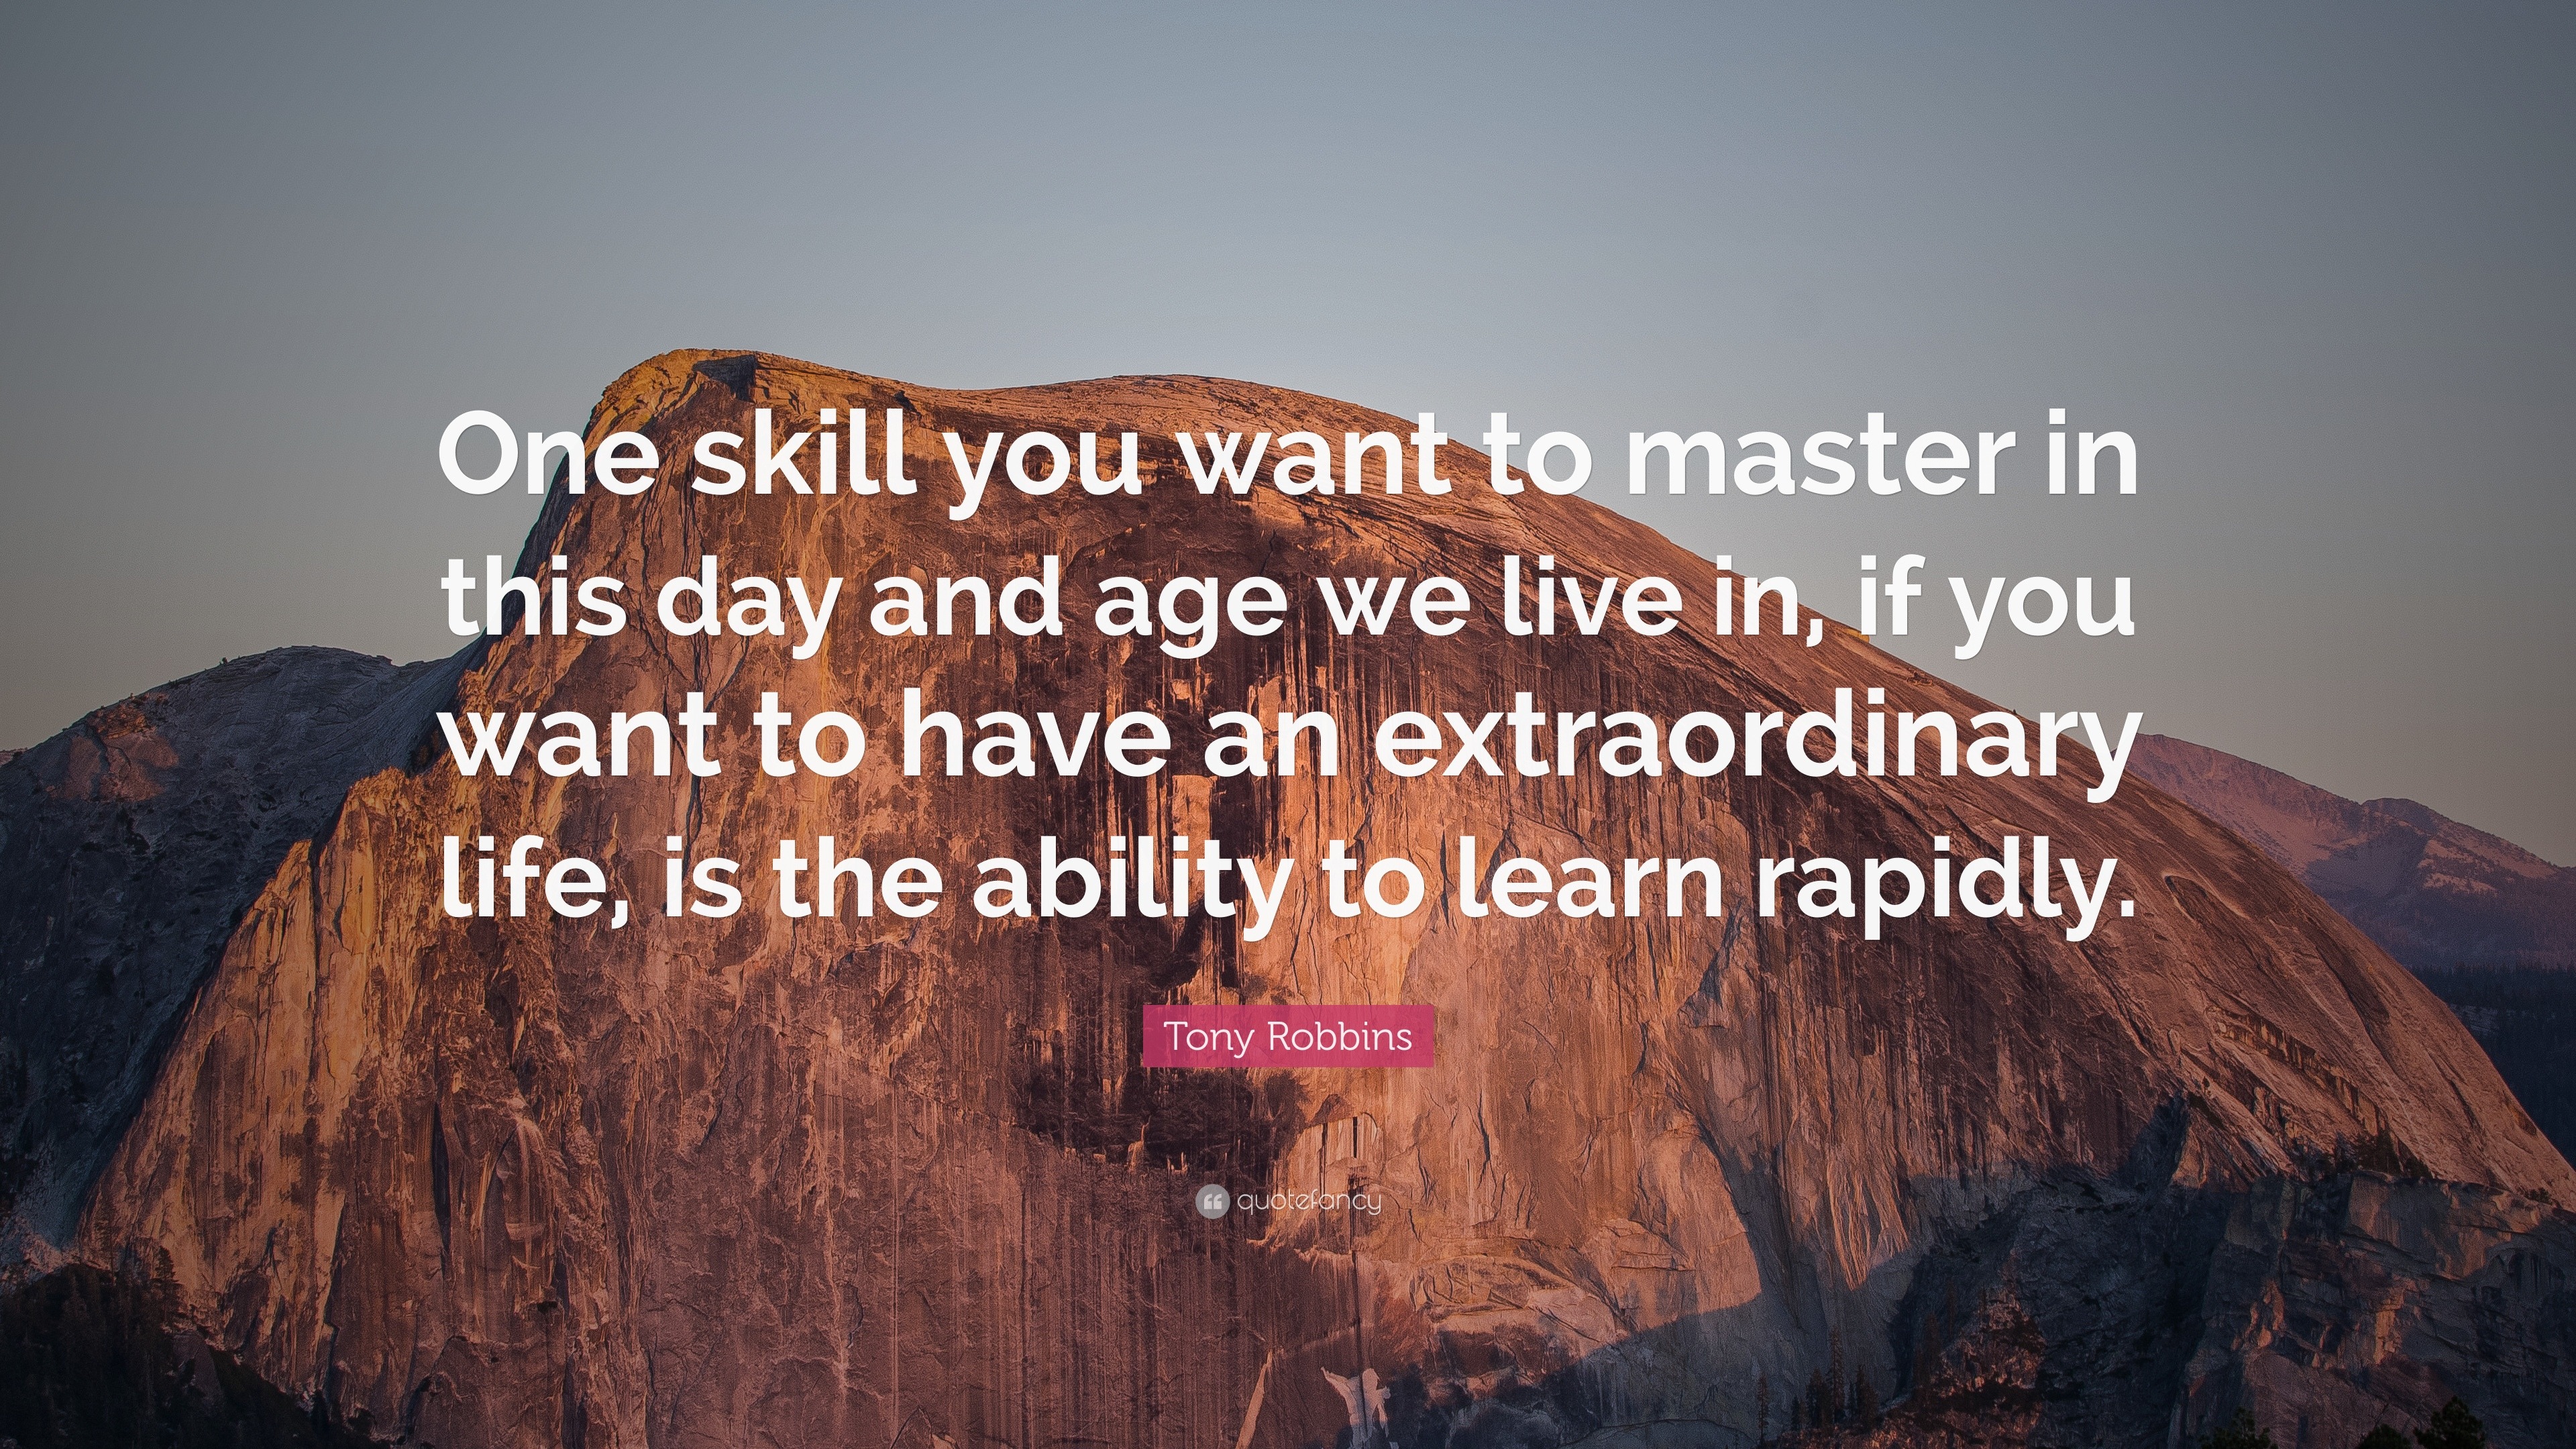 Tony Robbins Quote “ e skill you want to master in this day and age